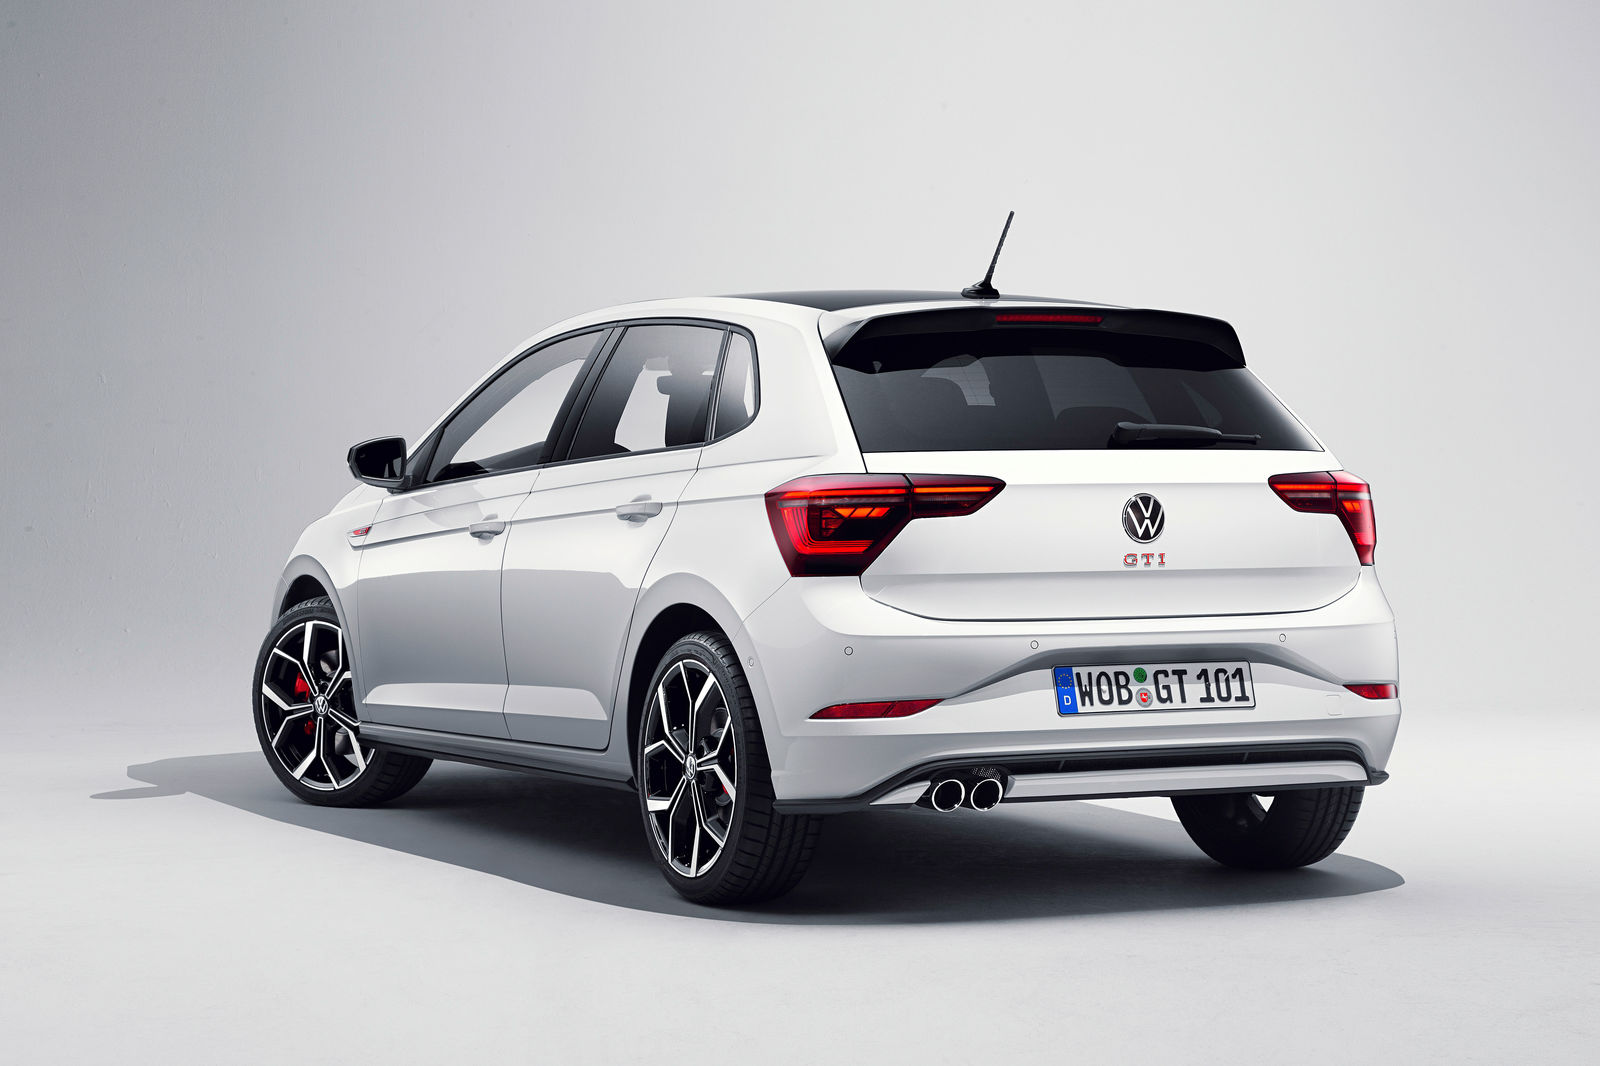 The new Polo GTI Volkswagen Newsroom